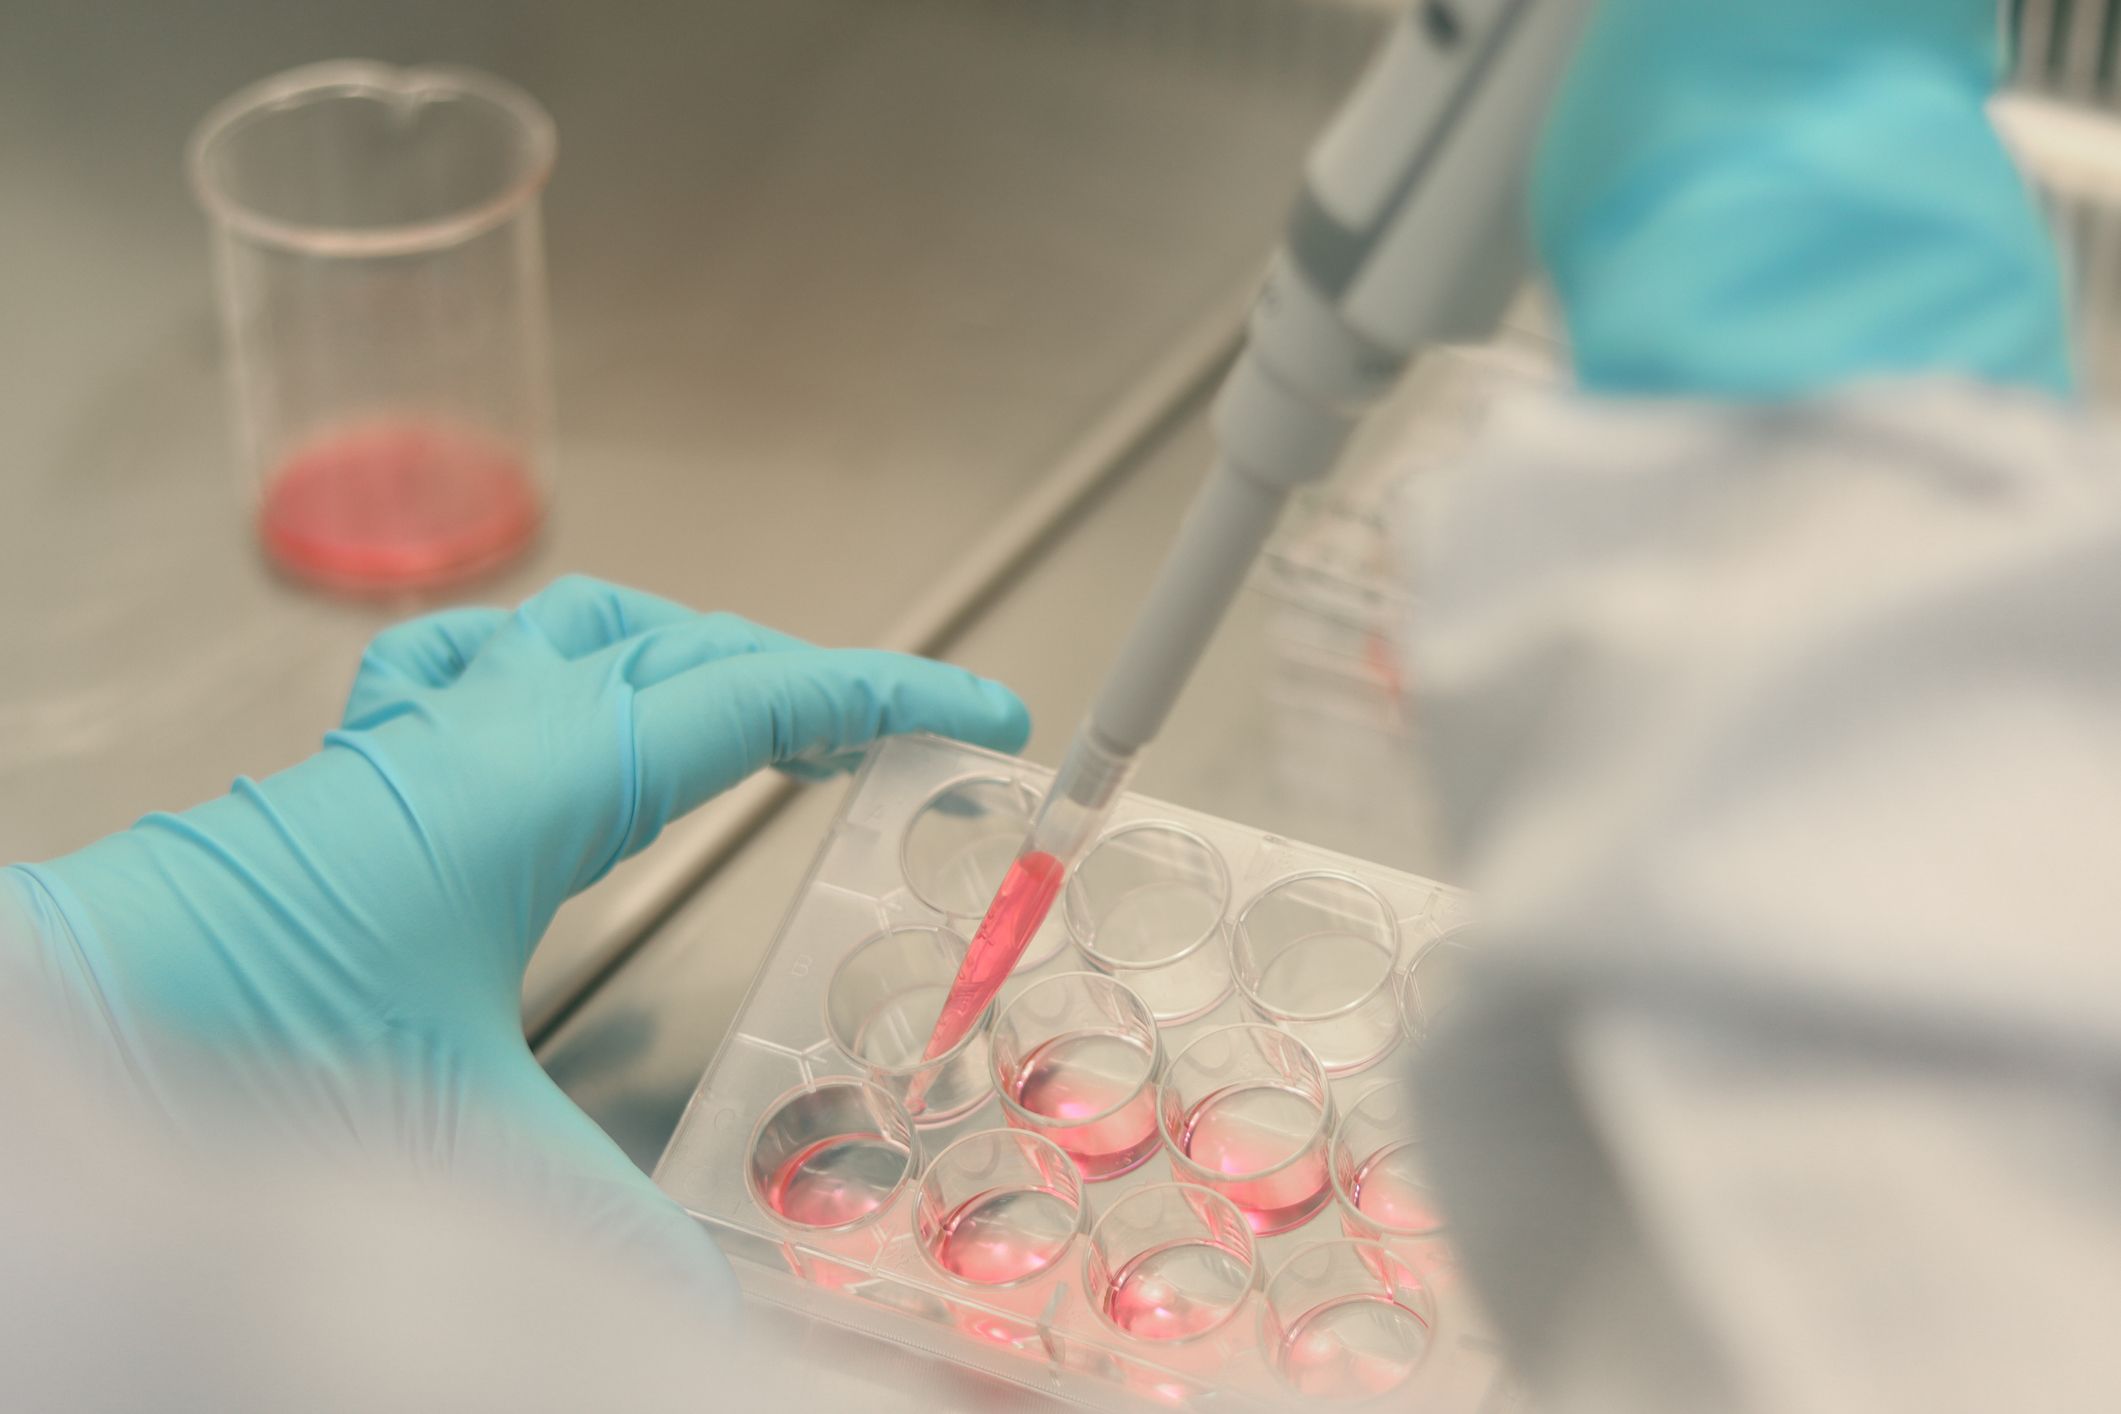 Scientist working in laboratory, microbiologist's hand with gloves holding a pipette, preparing culture media for cell culture science experiment